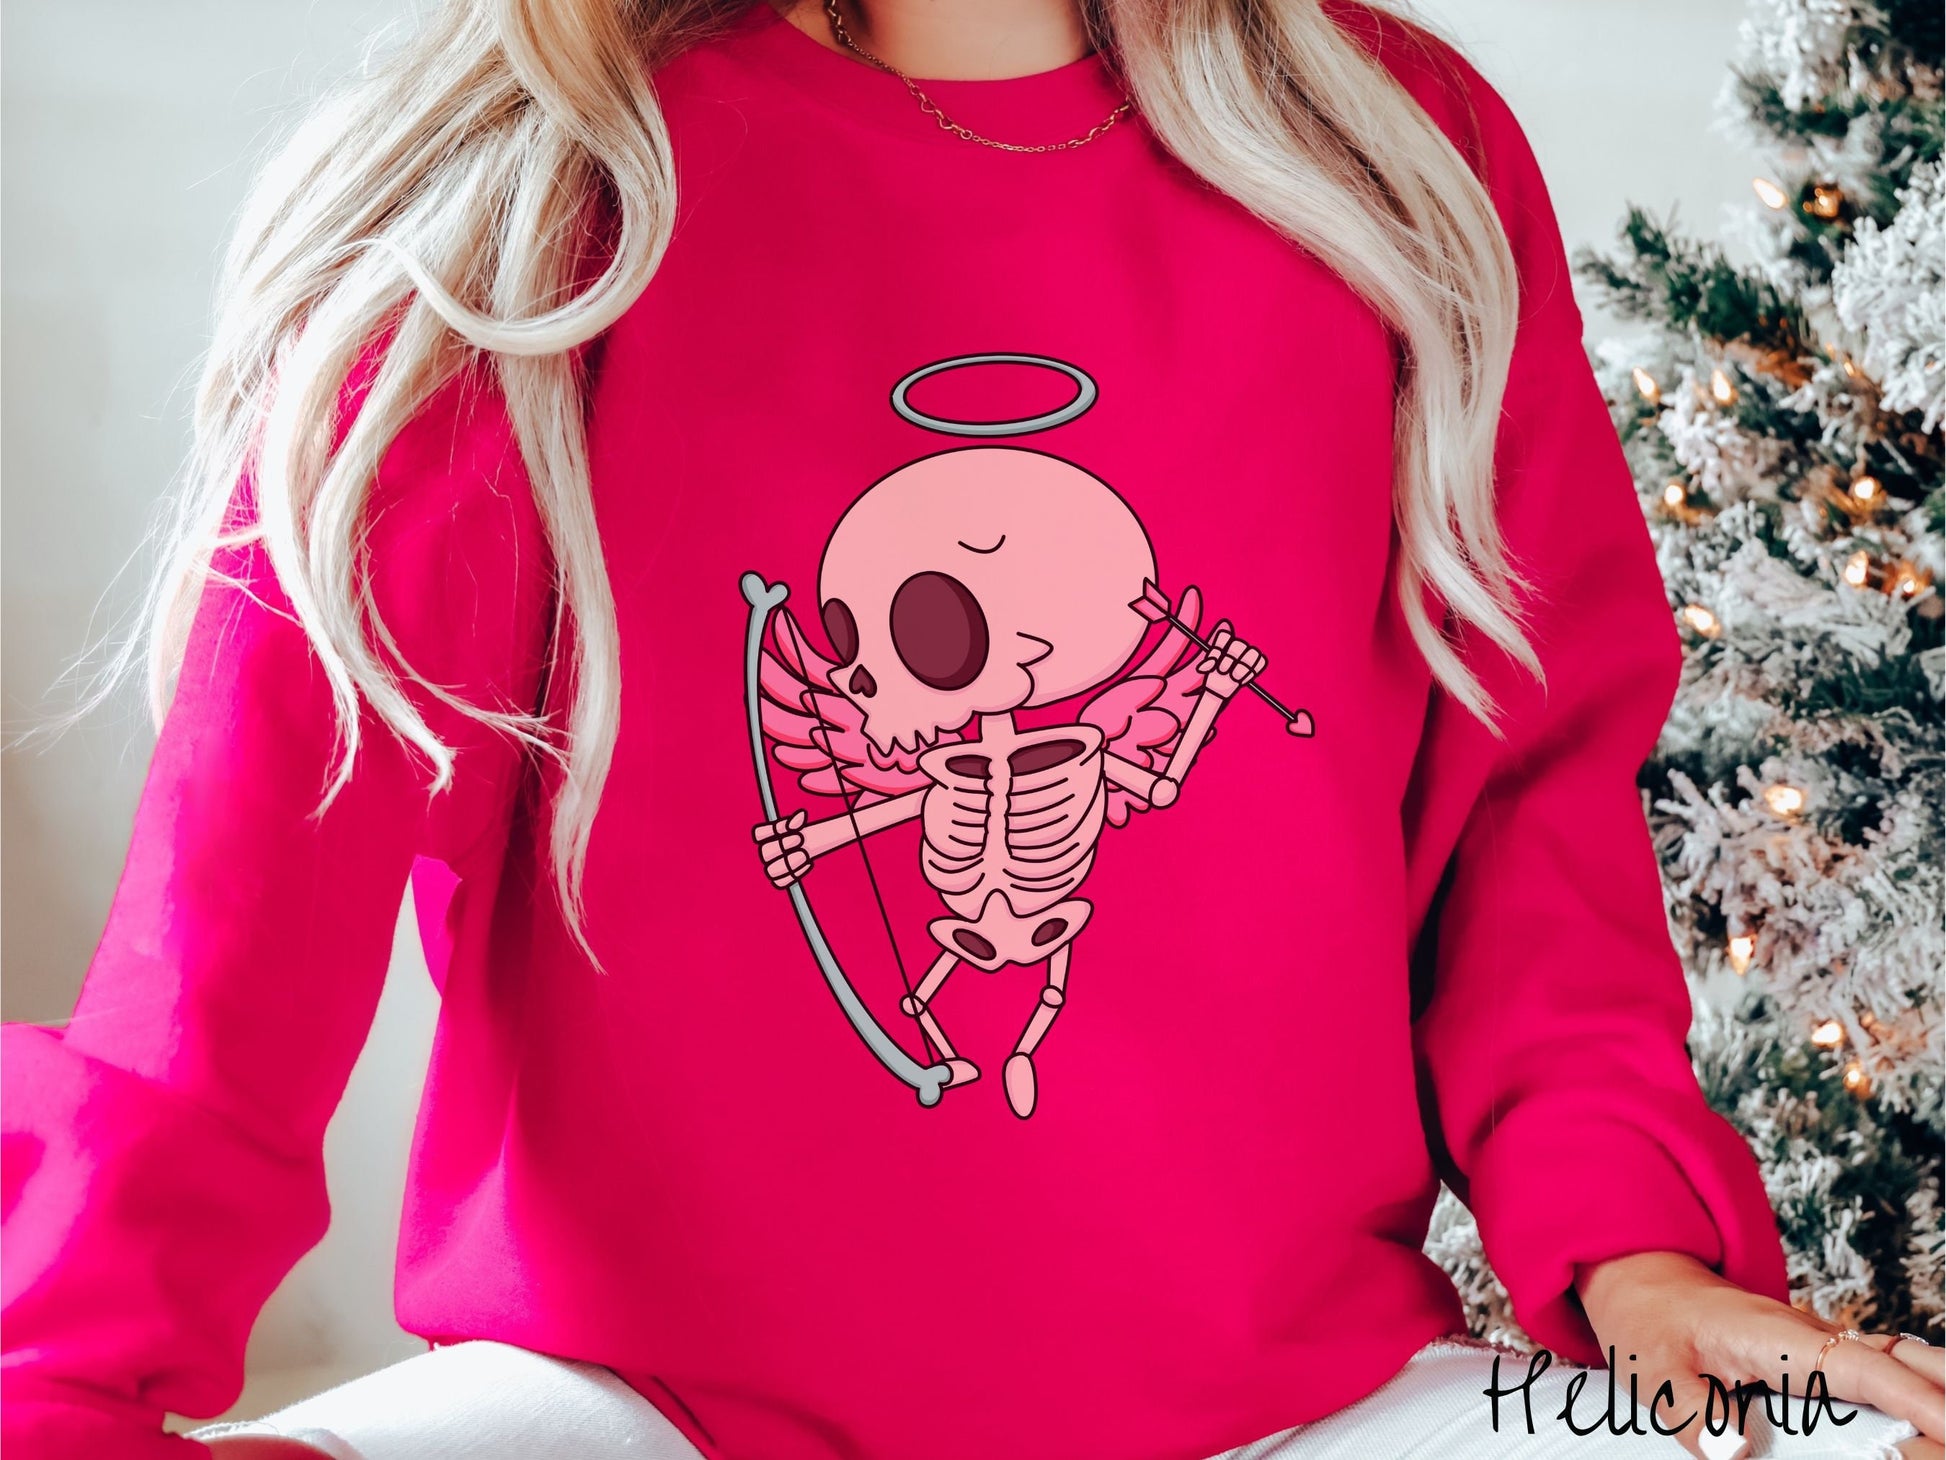 A woman wearing a cute heliconia colored sweatshirt with a pink winged baby skeleton cupid with a halo holding a heart-tipped arrow in its left hand and a bow in its right hand.